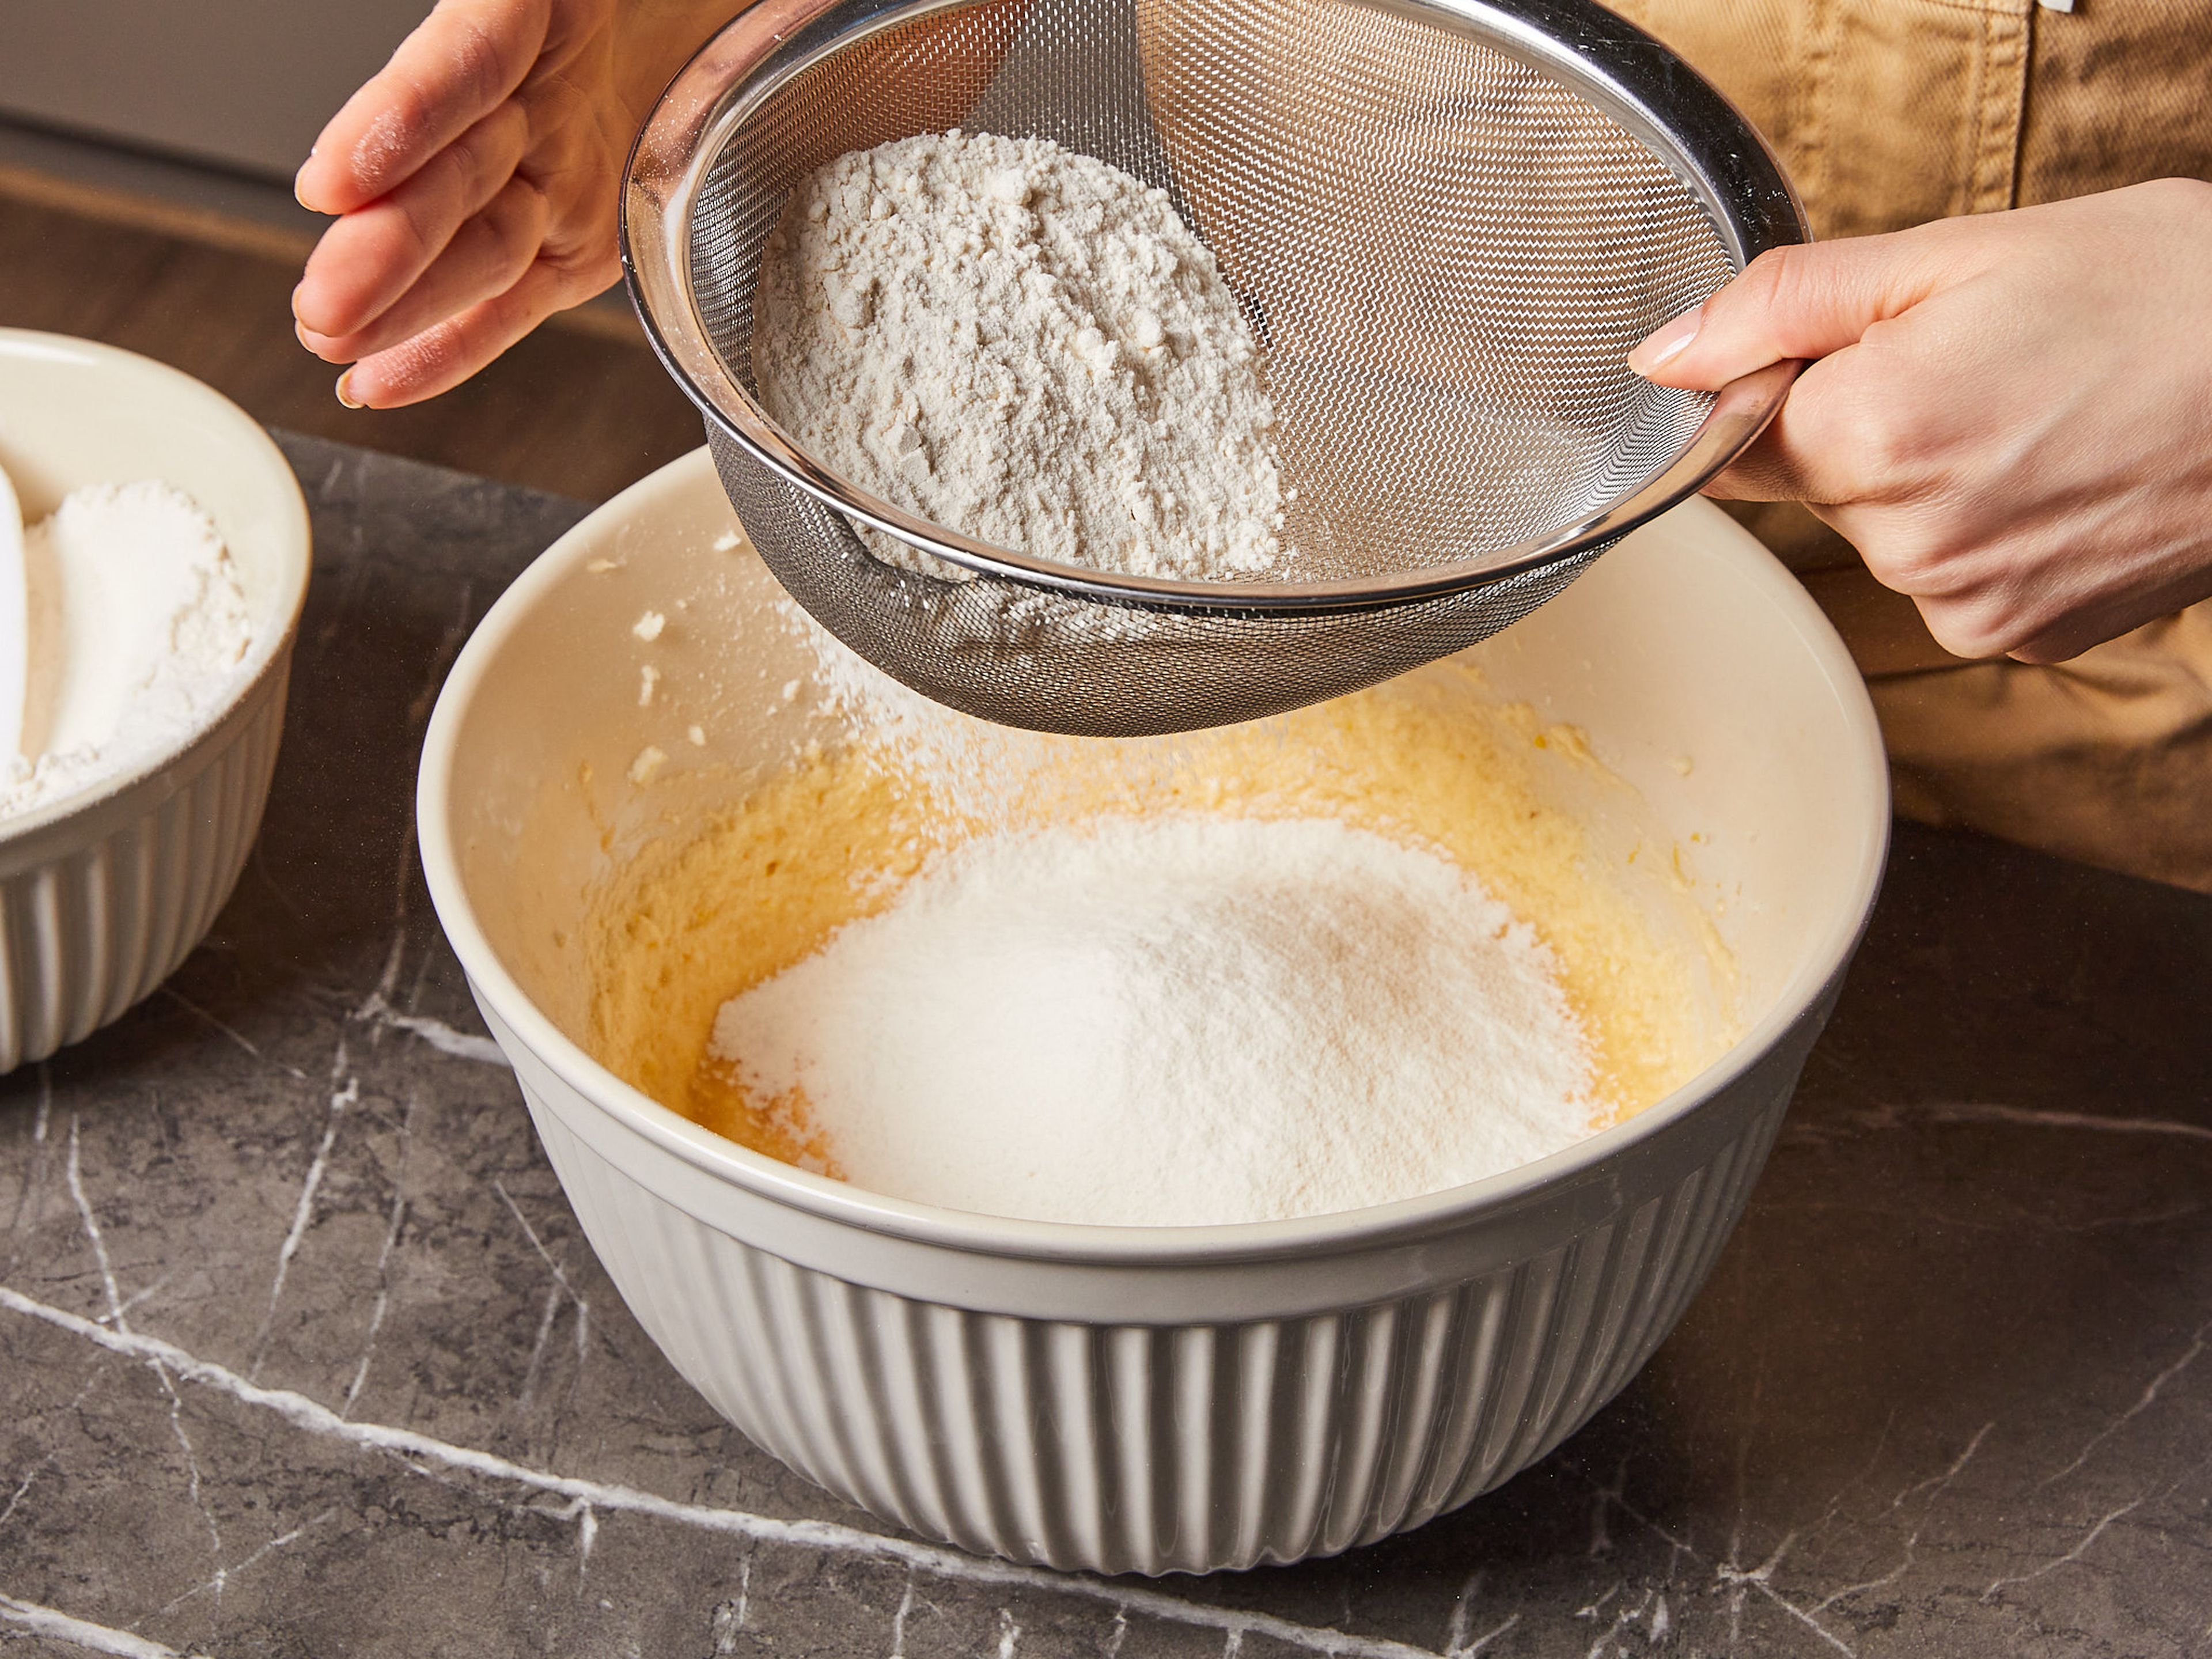 In a separate bowl, mix flour, baking powder, and salt. Sift this mix into the butter mix. Then, add milk and mix everything until you have a thick batter.